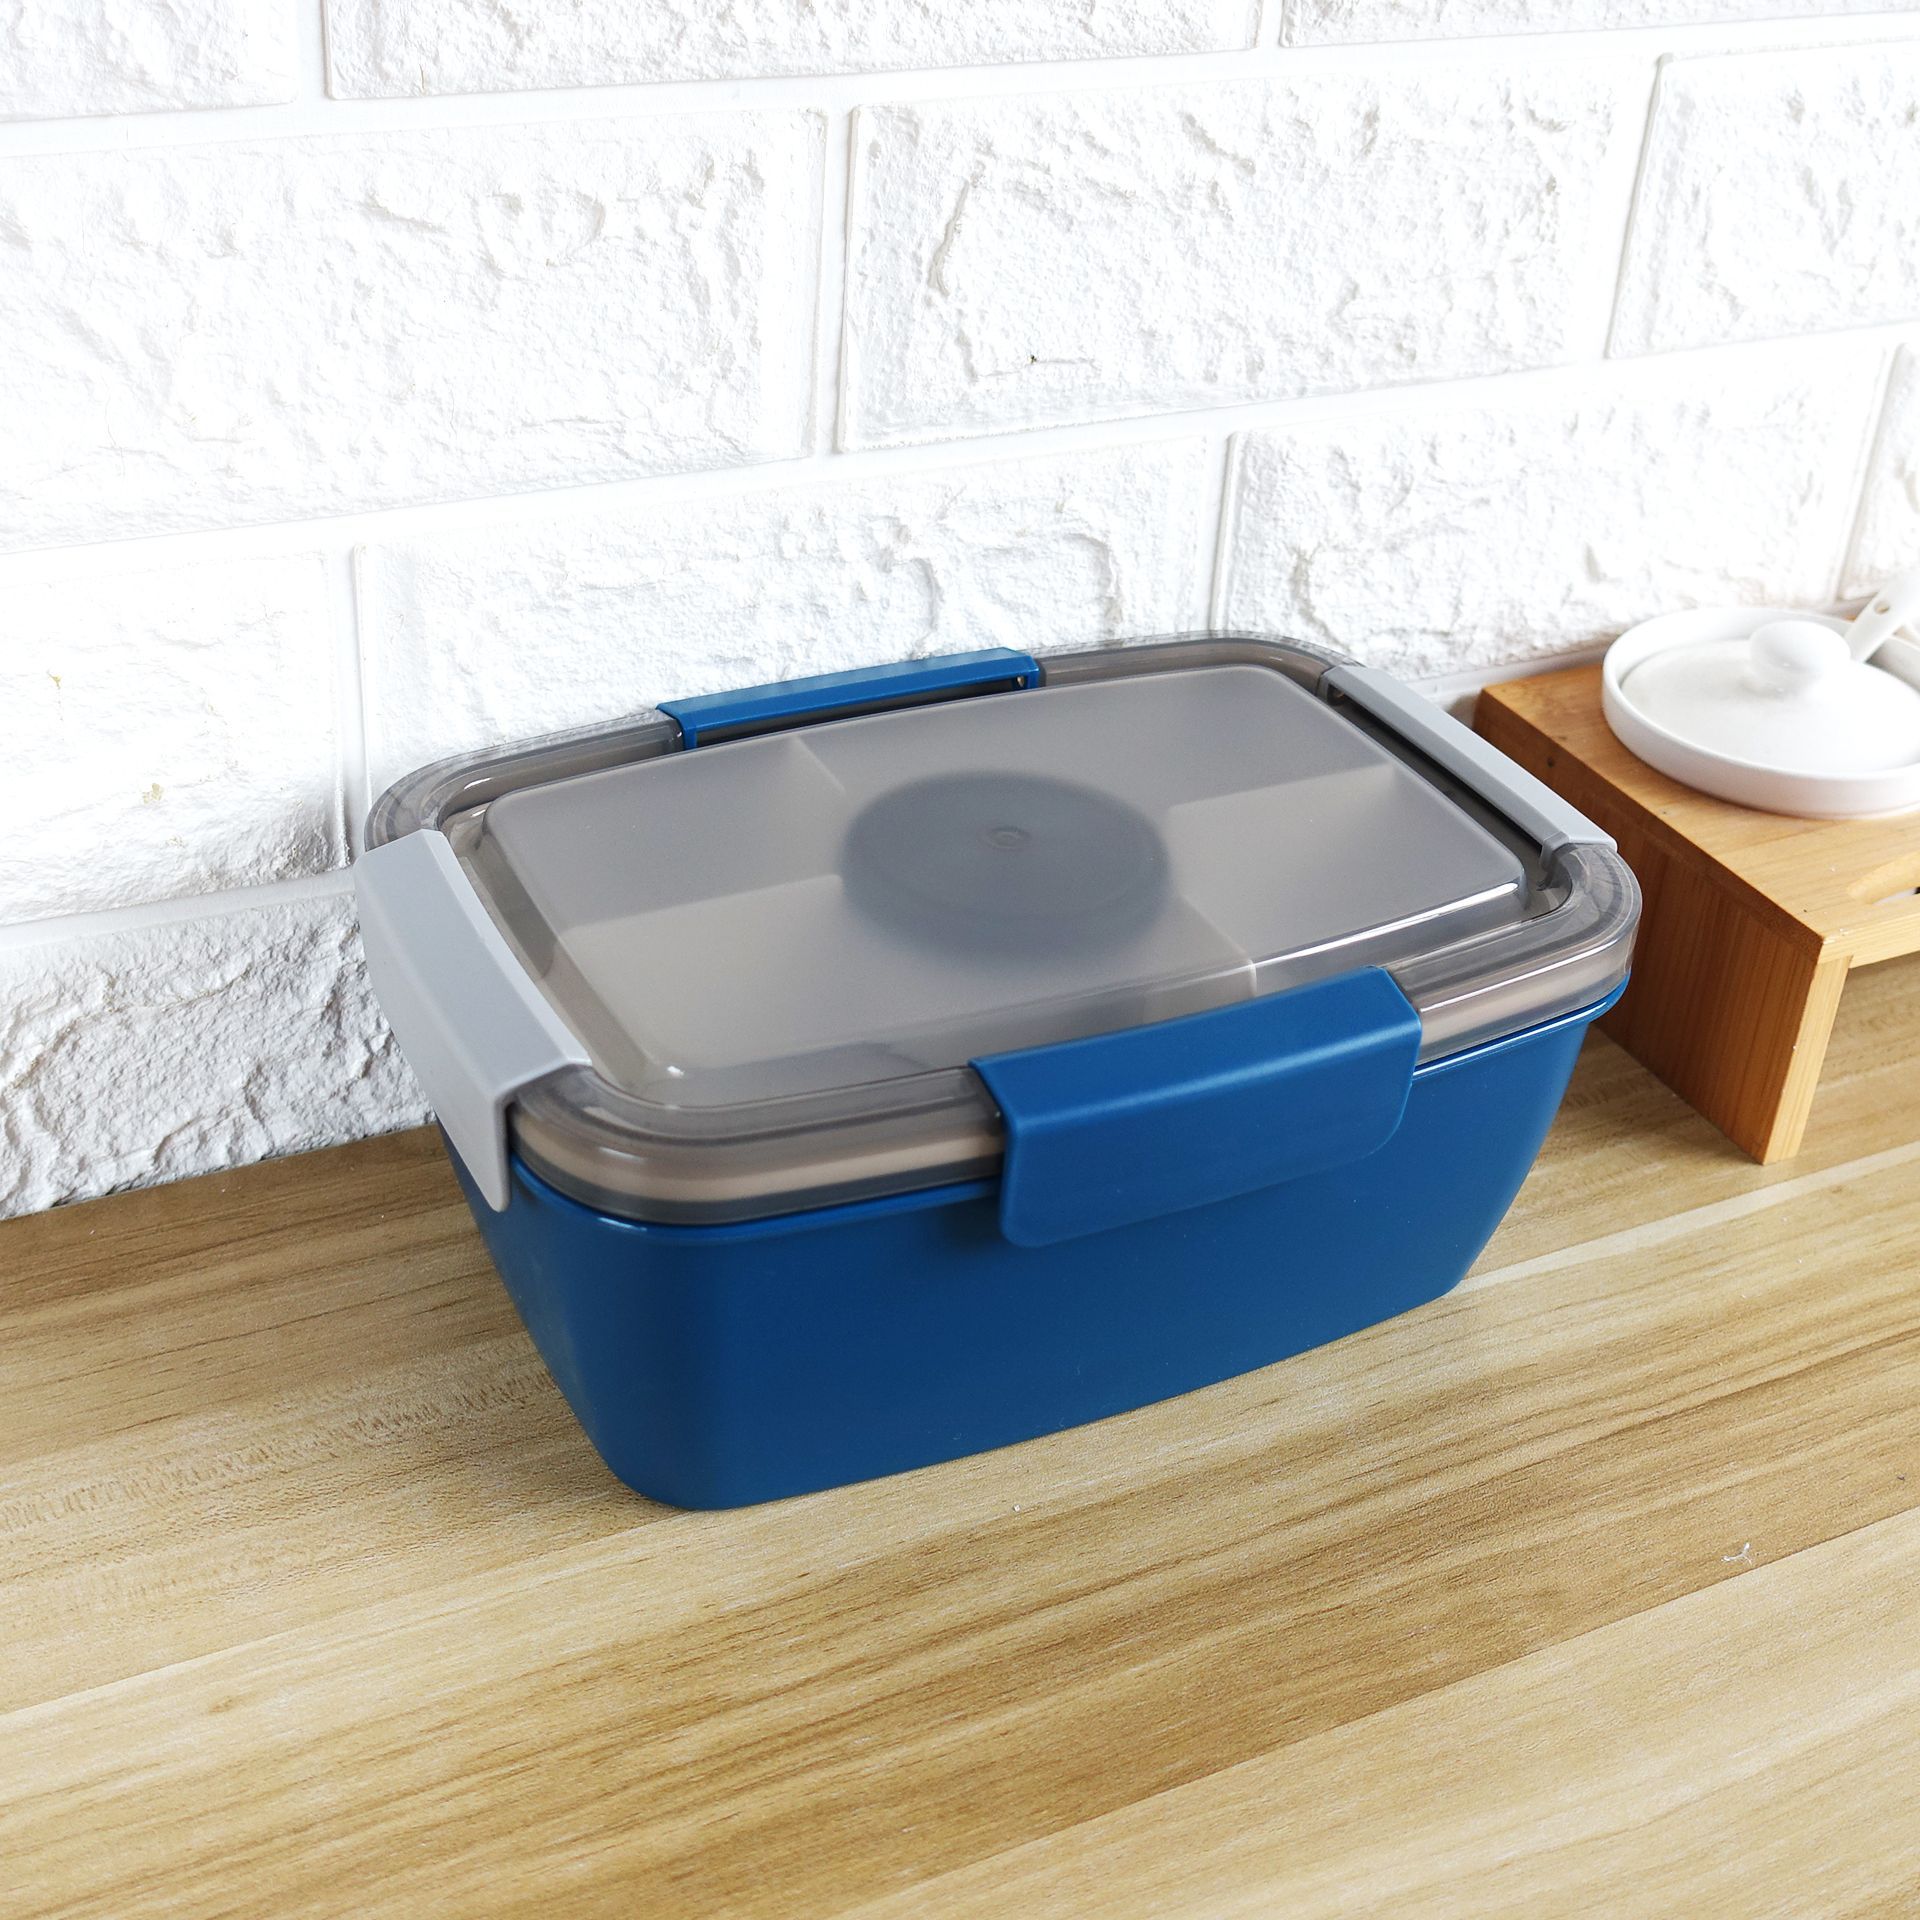 Lunch Container To Go, 2000ml Salad Bowls With 4 Compartments